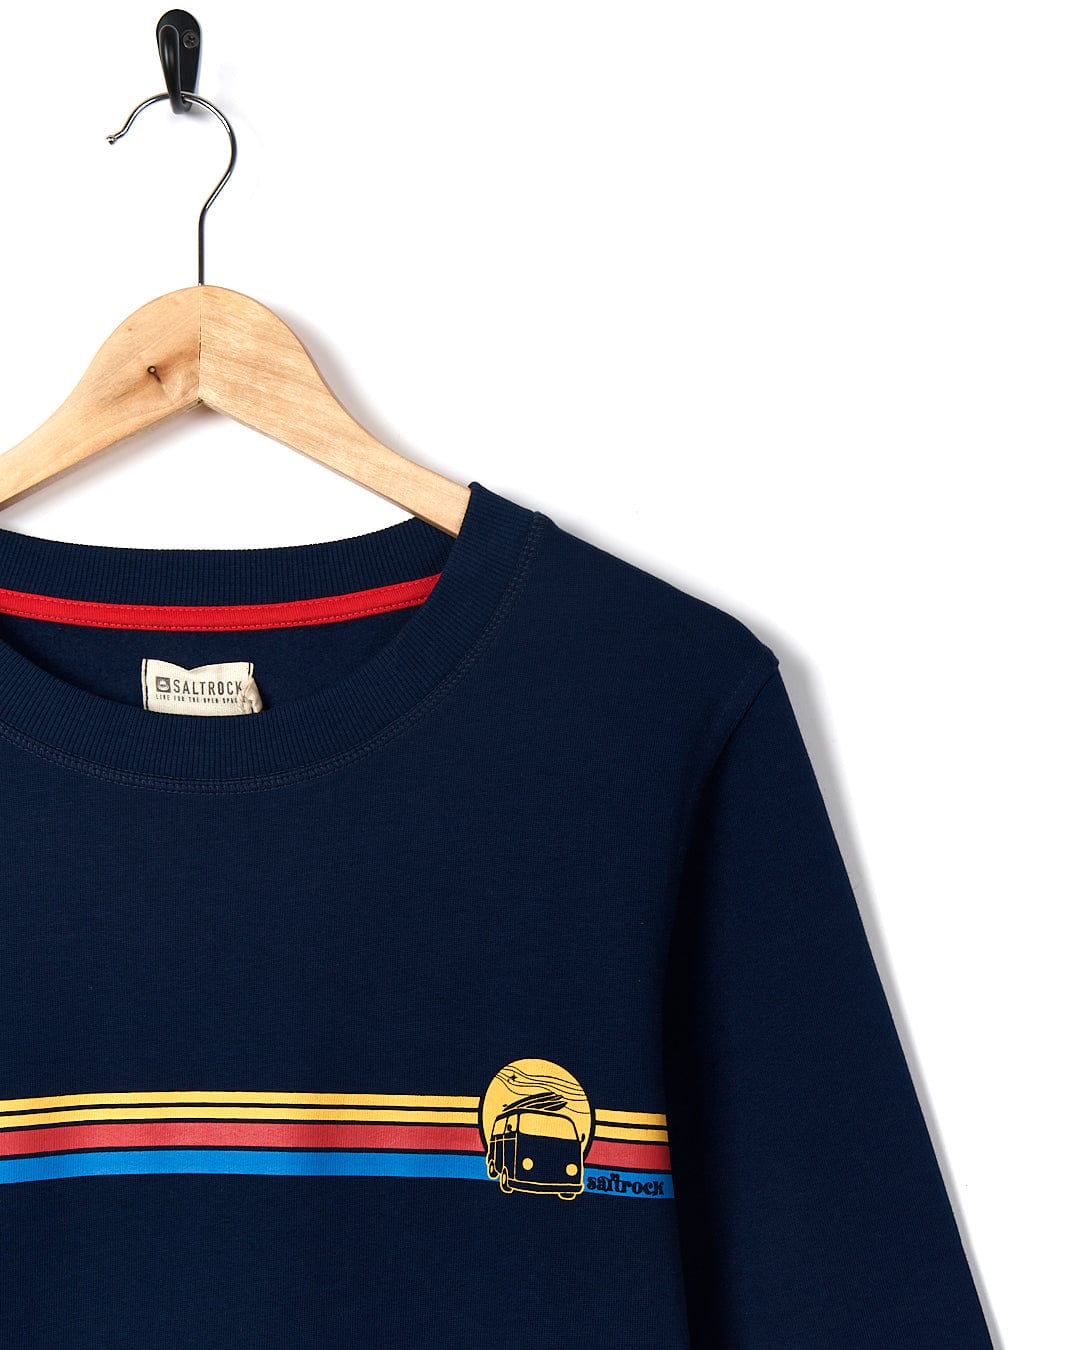 A Saltrock Celeste Stripe - Womens Crew Sweat - Blue with a yellow, blue and red stripe.